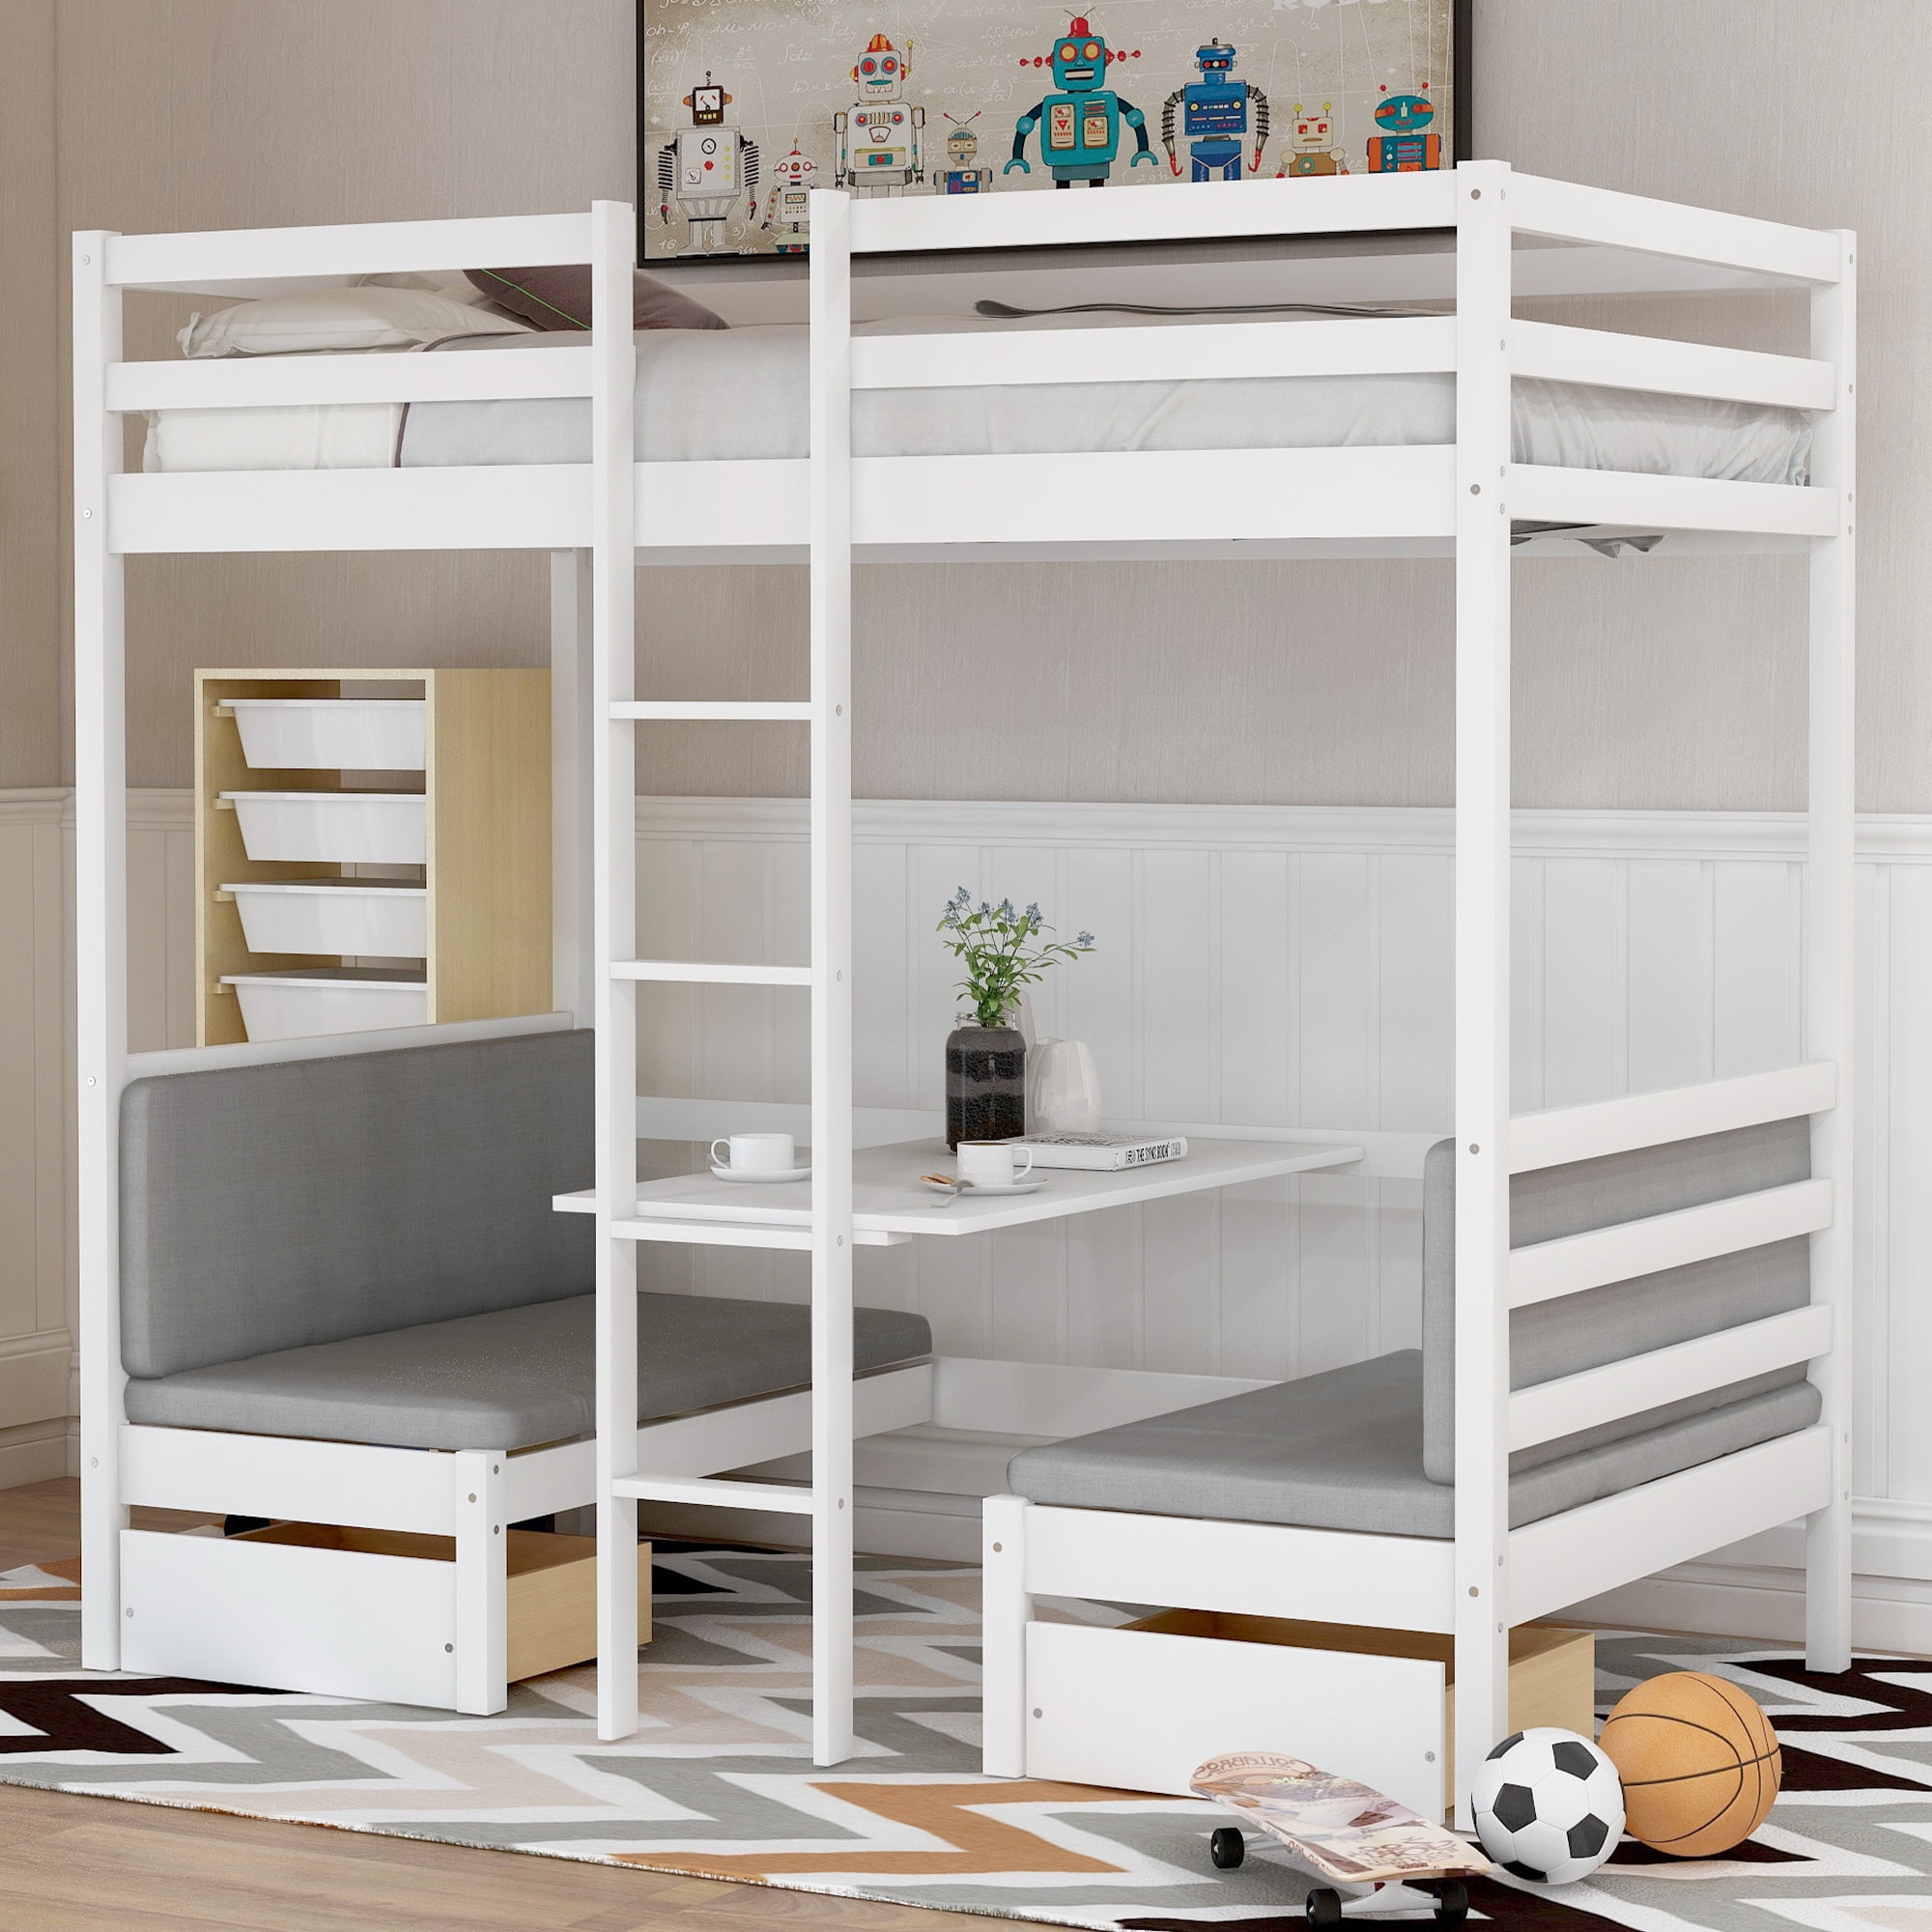 Euroco Solid Wood Convertible Twin Bunk, Queen And Twin Bunk Bed With Desk